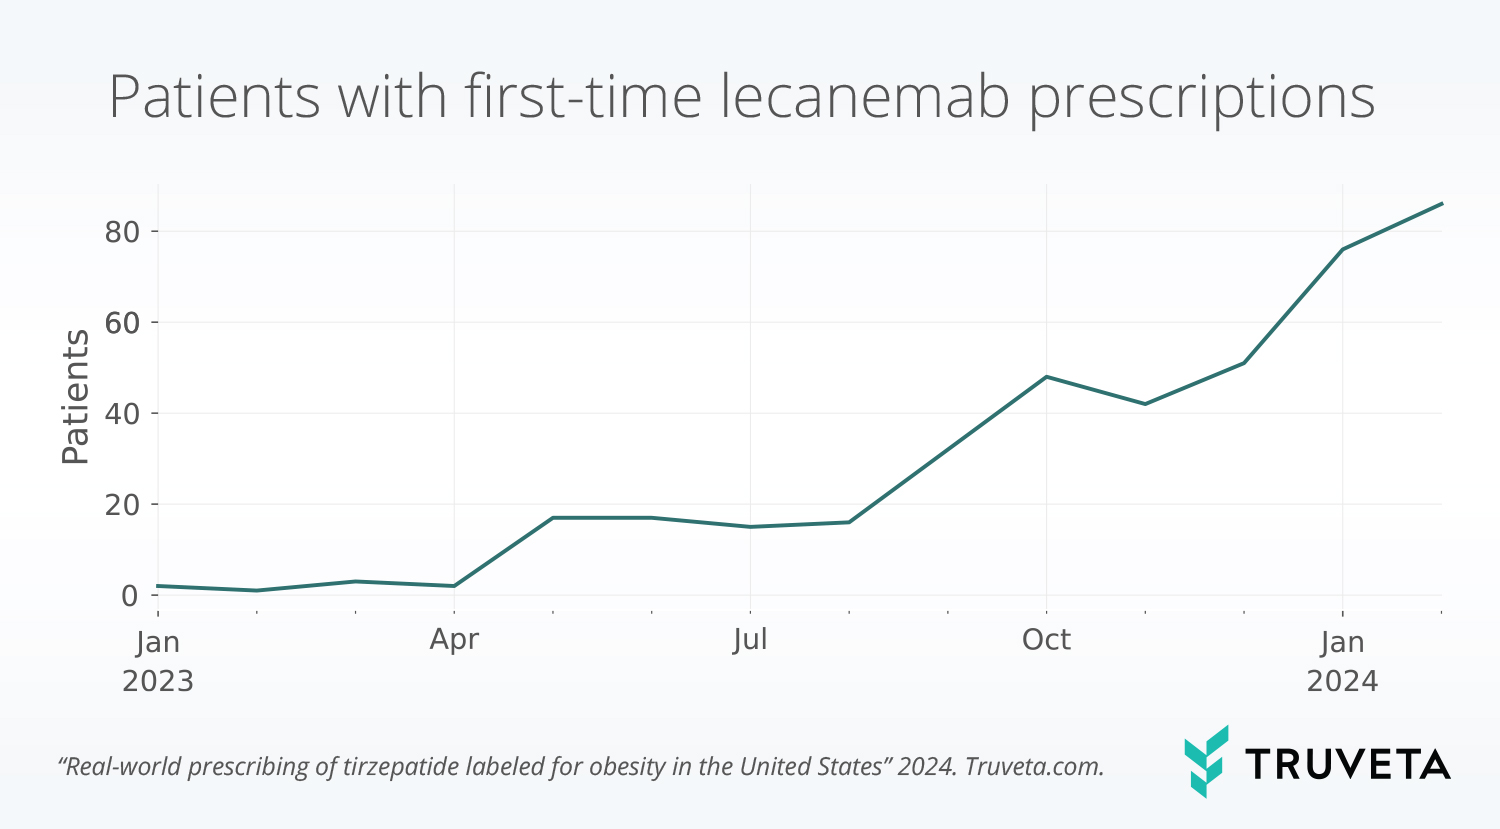 Truveta Research explored the uptake, demographics, and SDOH factors of US adults prescribed lecanemab, compared to the general adult population diagnosed with Alzheimer’s disease during the study period using EHR data.